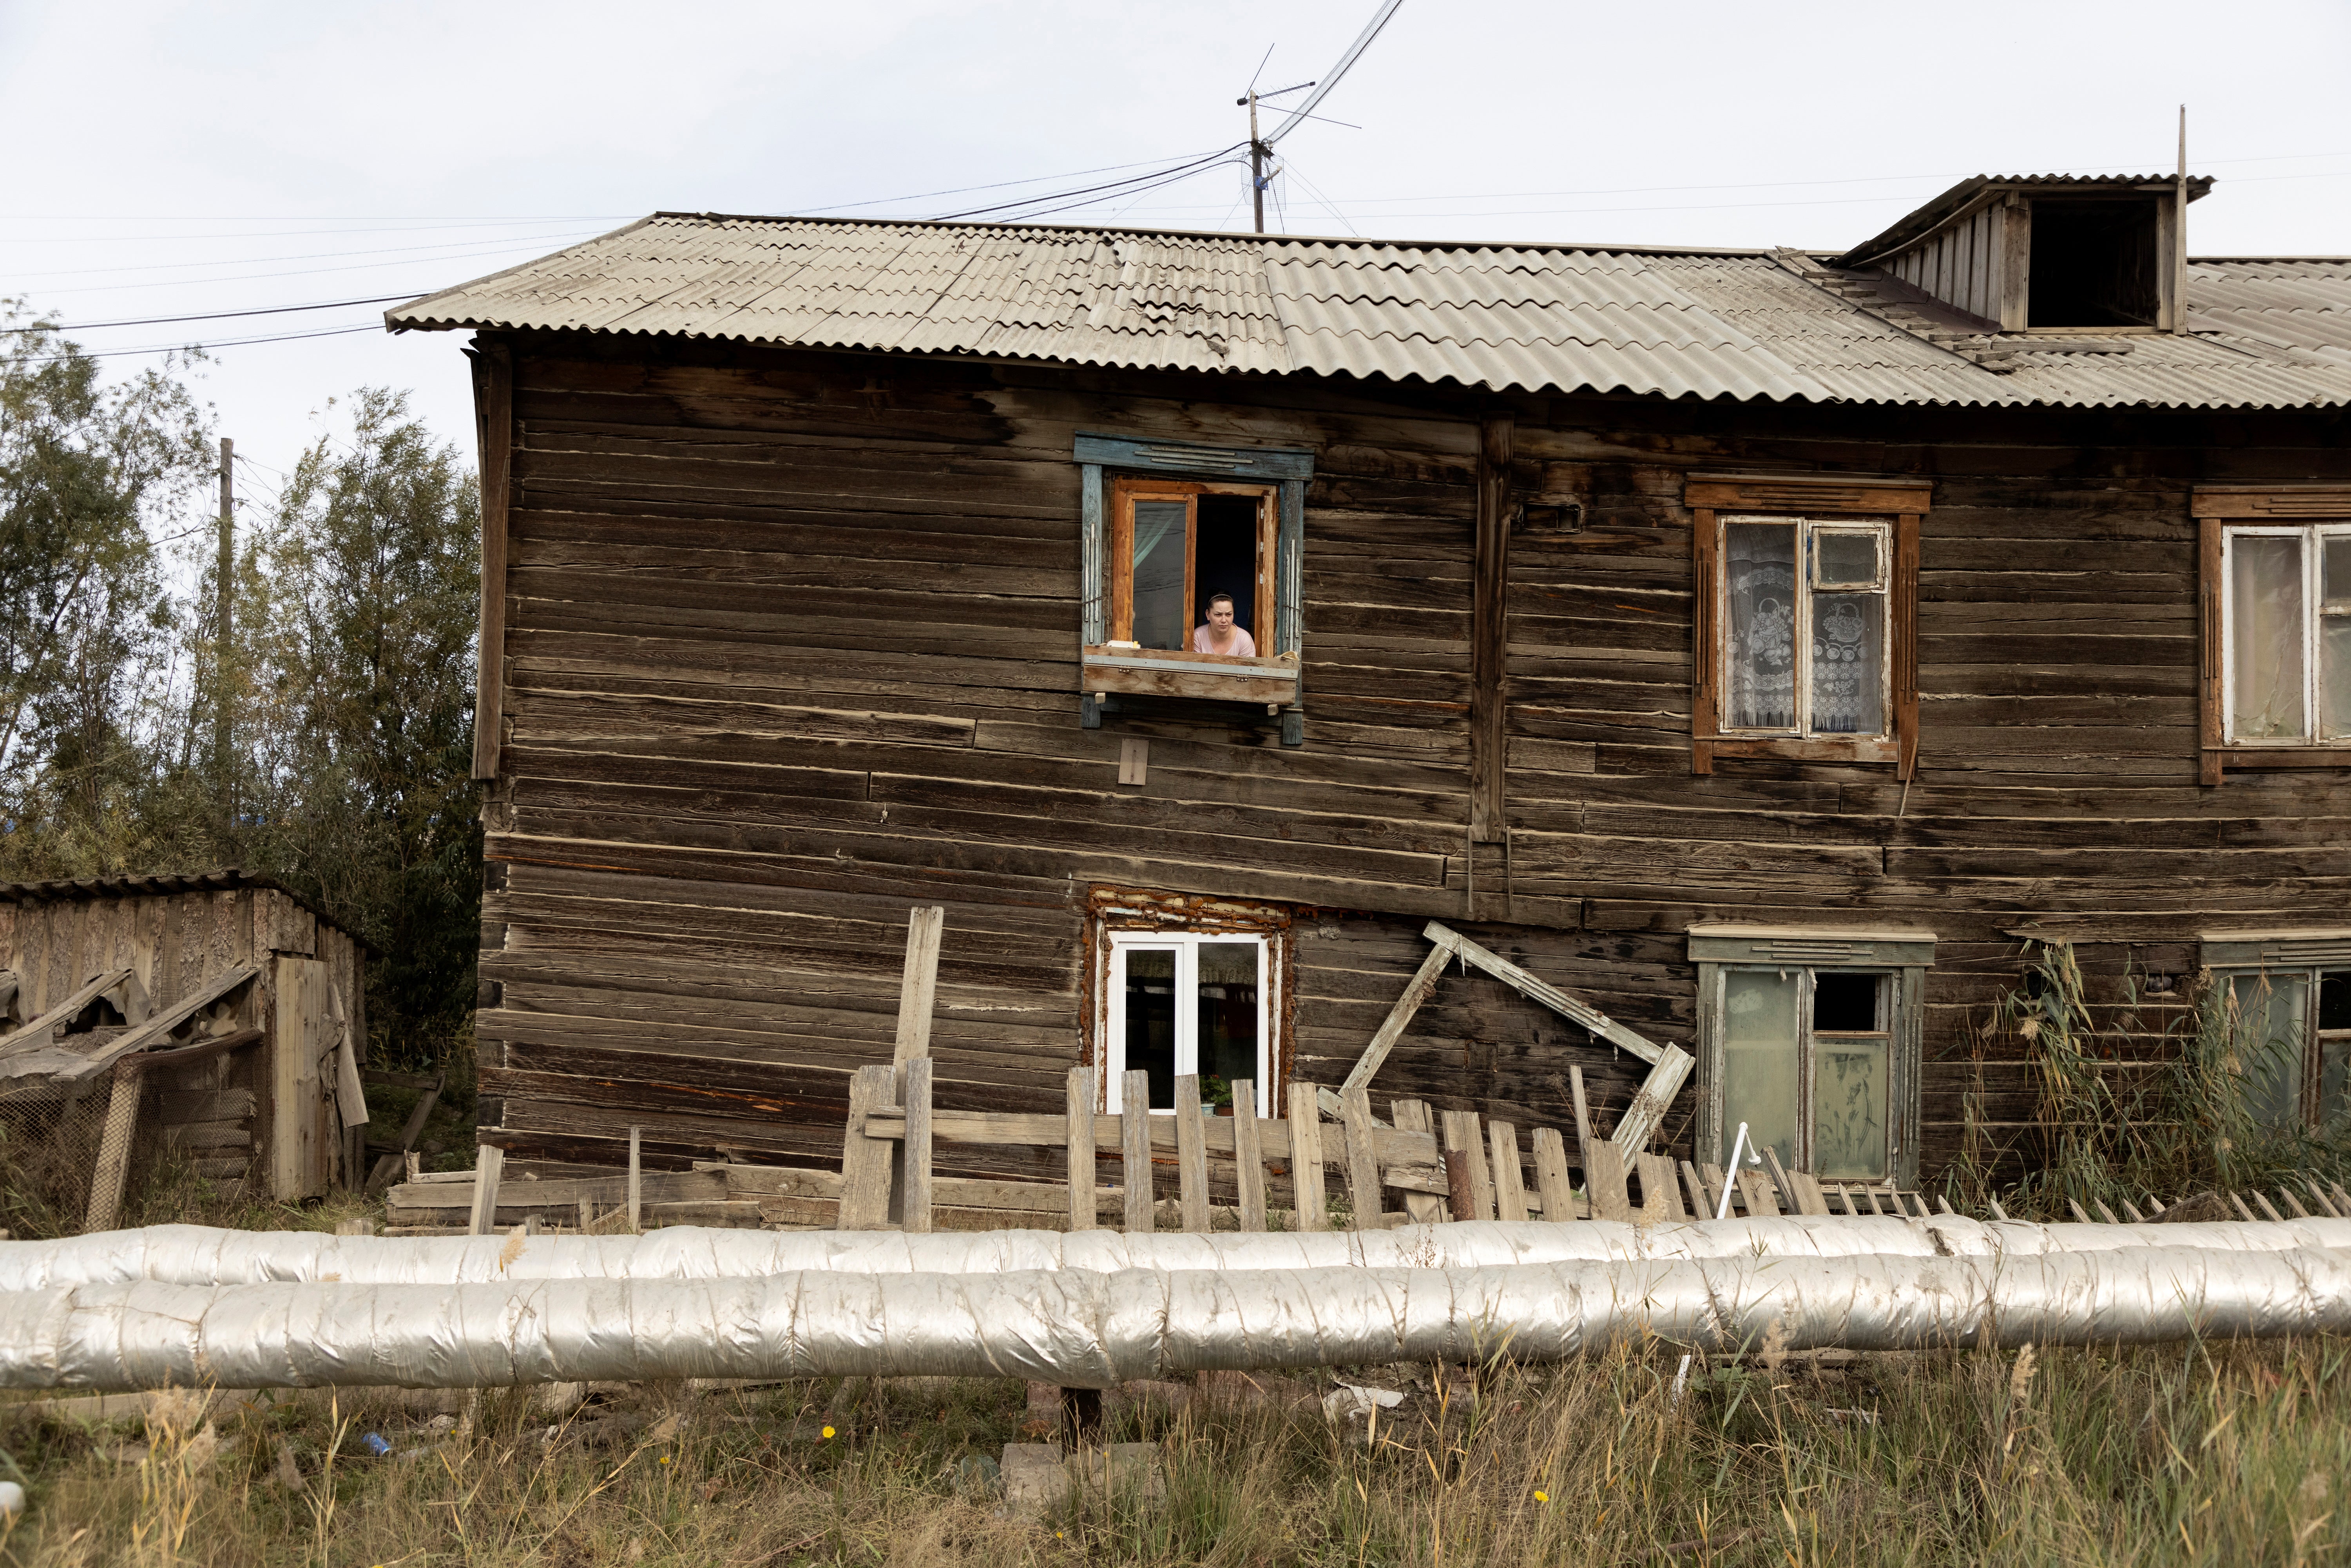 Maria Nedostupenko looks out of the window at her home which was damaged by permafrost under its foundation